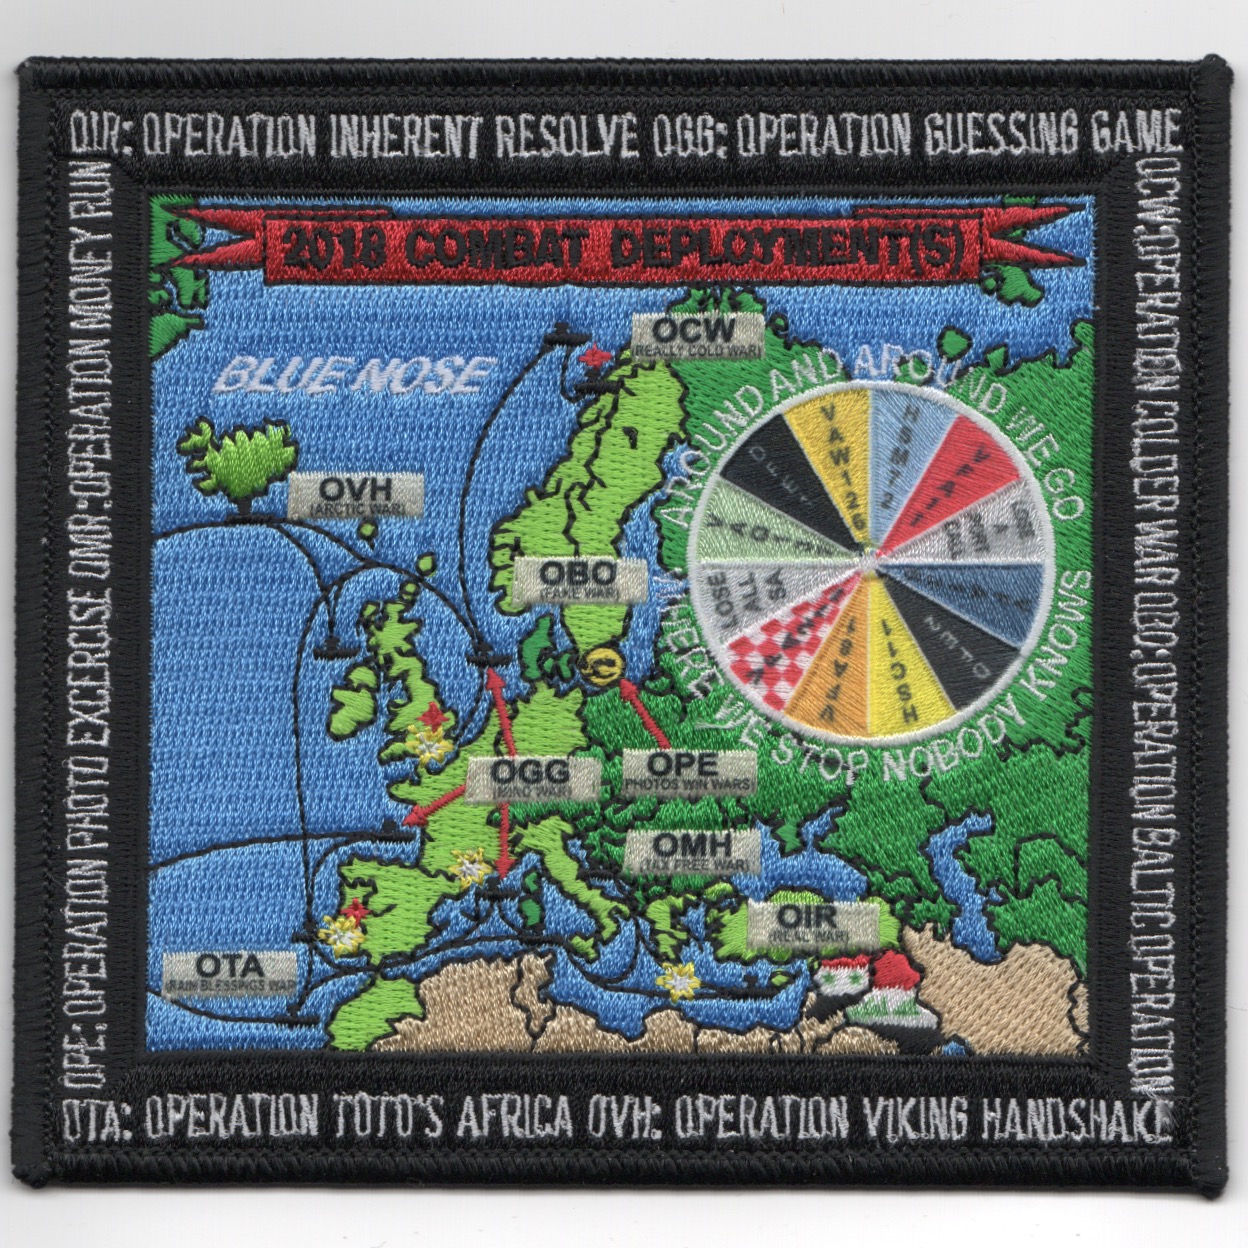 VFA-11 2018 'Deployment Wheel' Cruise Patch